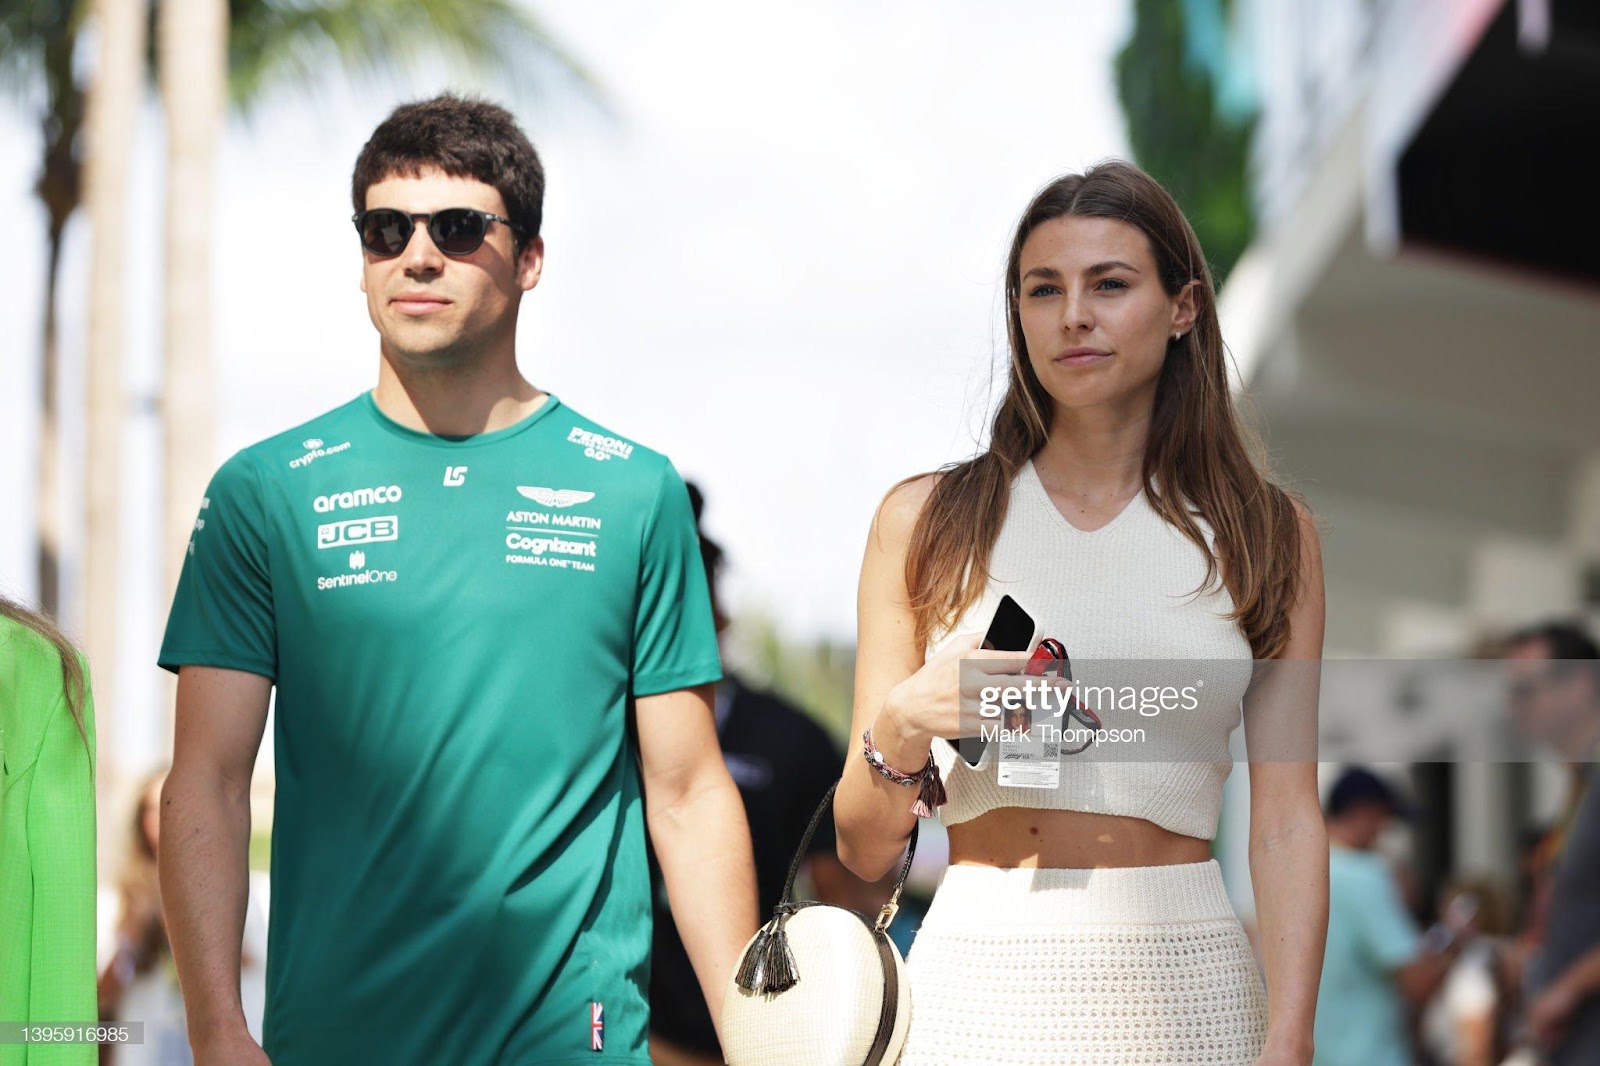 D:\Documenti\posts\posts\Miami\New folder\donne\donne piloti\lance-stroll-of-canada-and-aston-martin-f1-team-walks-in-the-paddock-picture-id1395916985.jpg